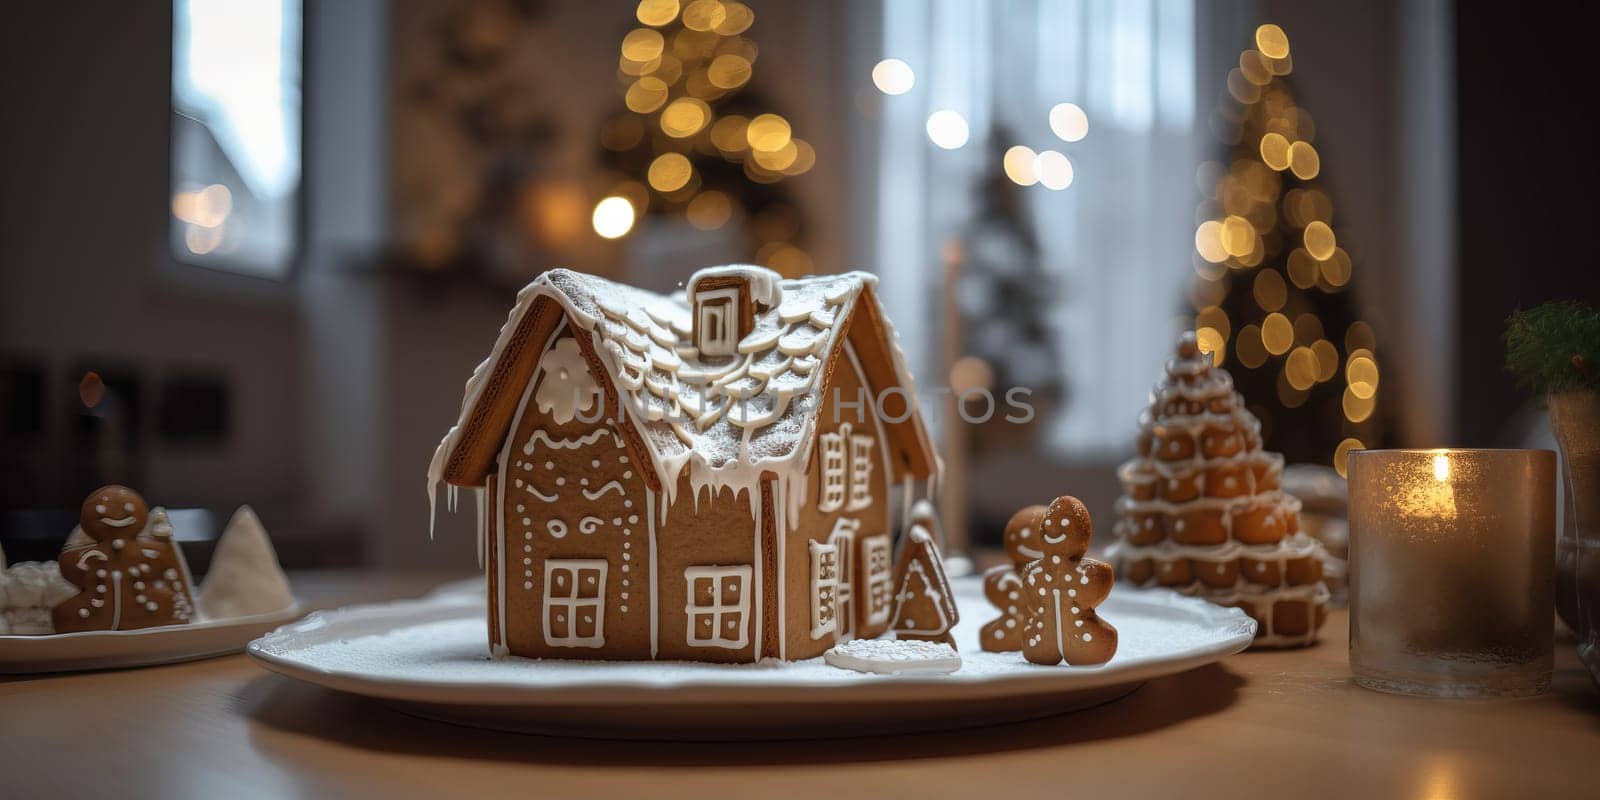 Cose-up of a gingerbread house on a table with blurred background